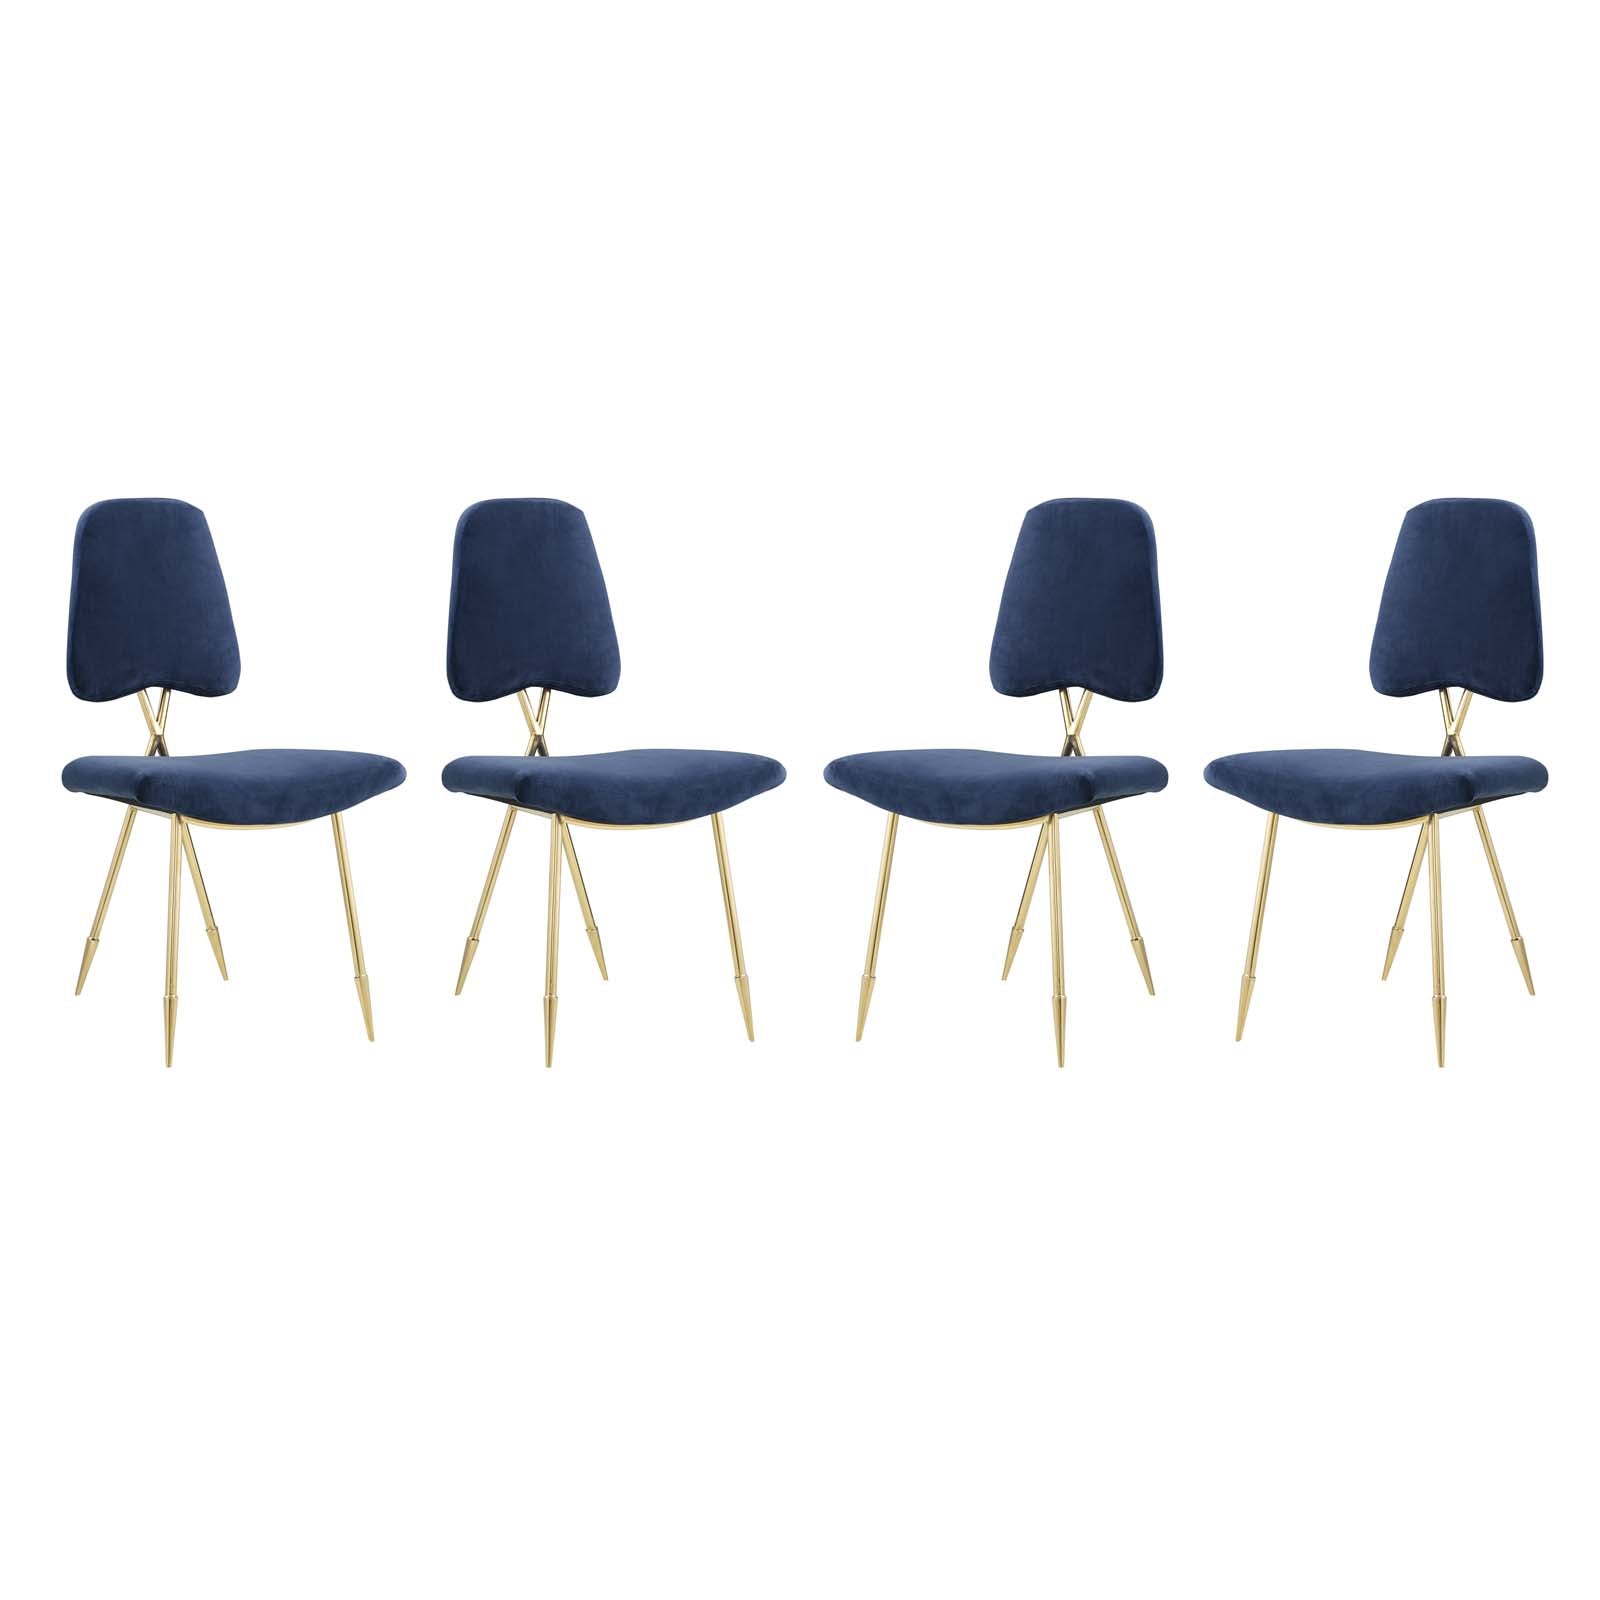 Modway Dining Chairs - Ponder Dining Side Chair Navy (Set of 4)